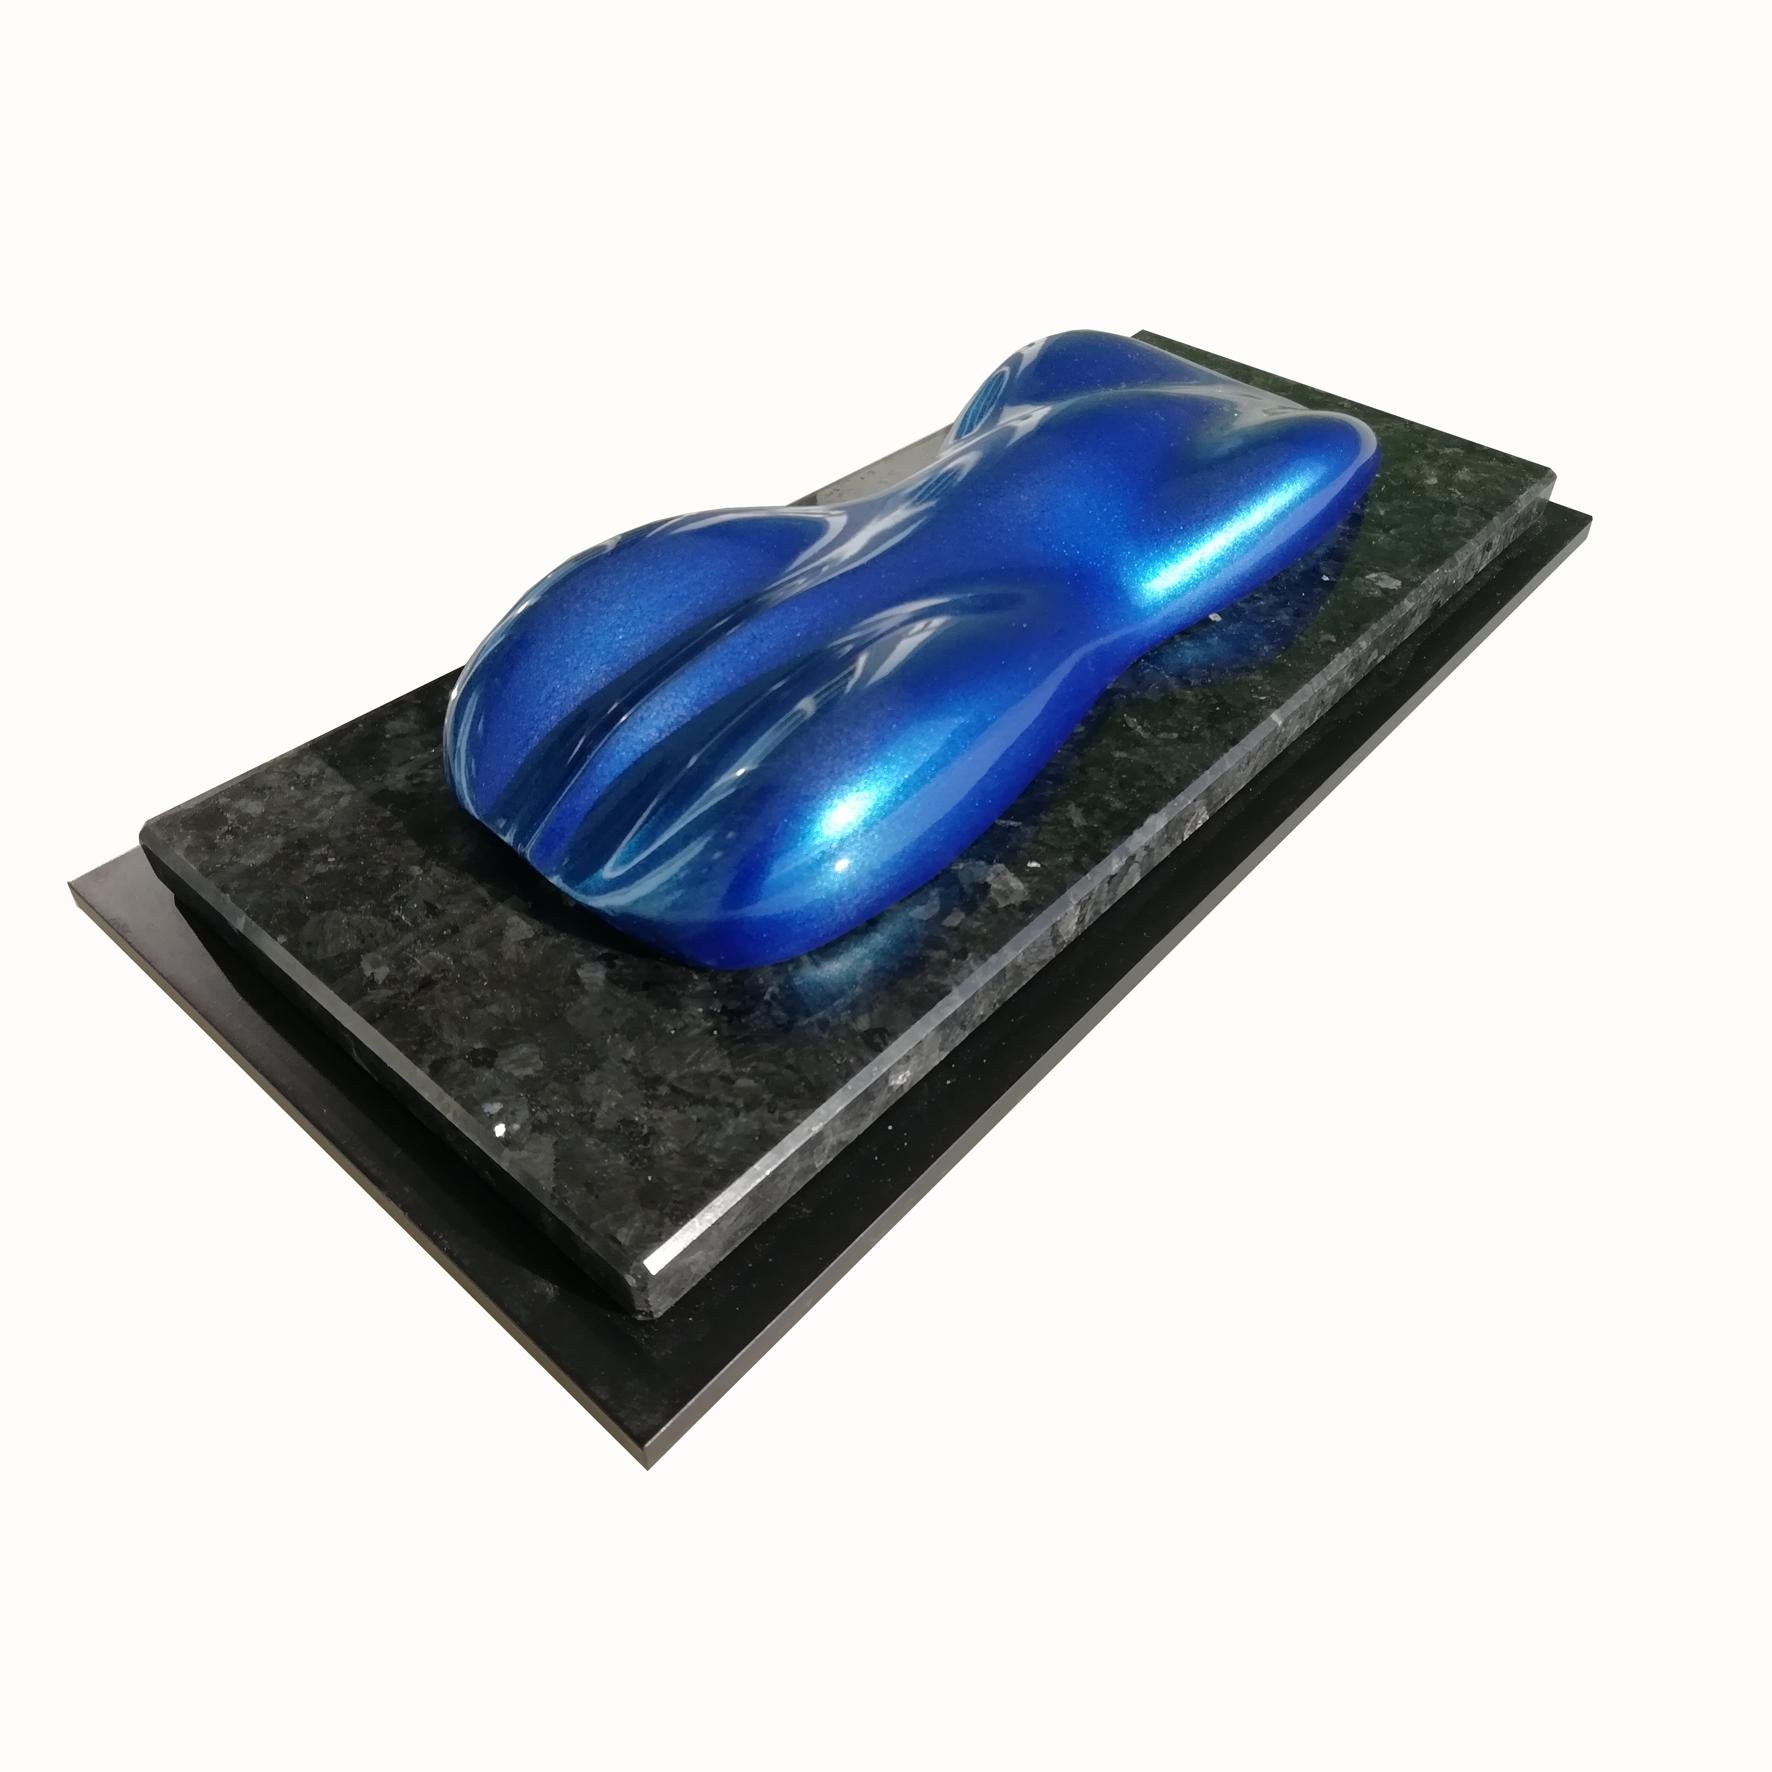 Blue Lago

A lacquered and varnished marble composite model of a racing car.
On a marble and lacquered rectangular wood base.

Belzoni finds inspiration in the legendary racing cars of the 1950s and the 1960s.
His elegant sculptures epitomize the